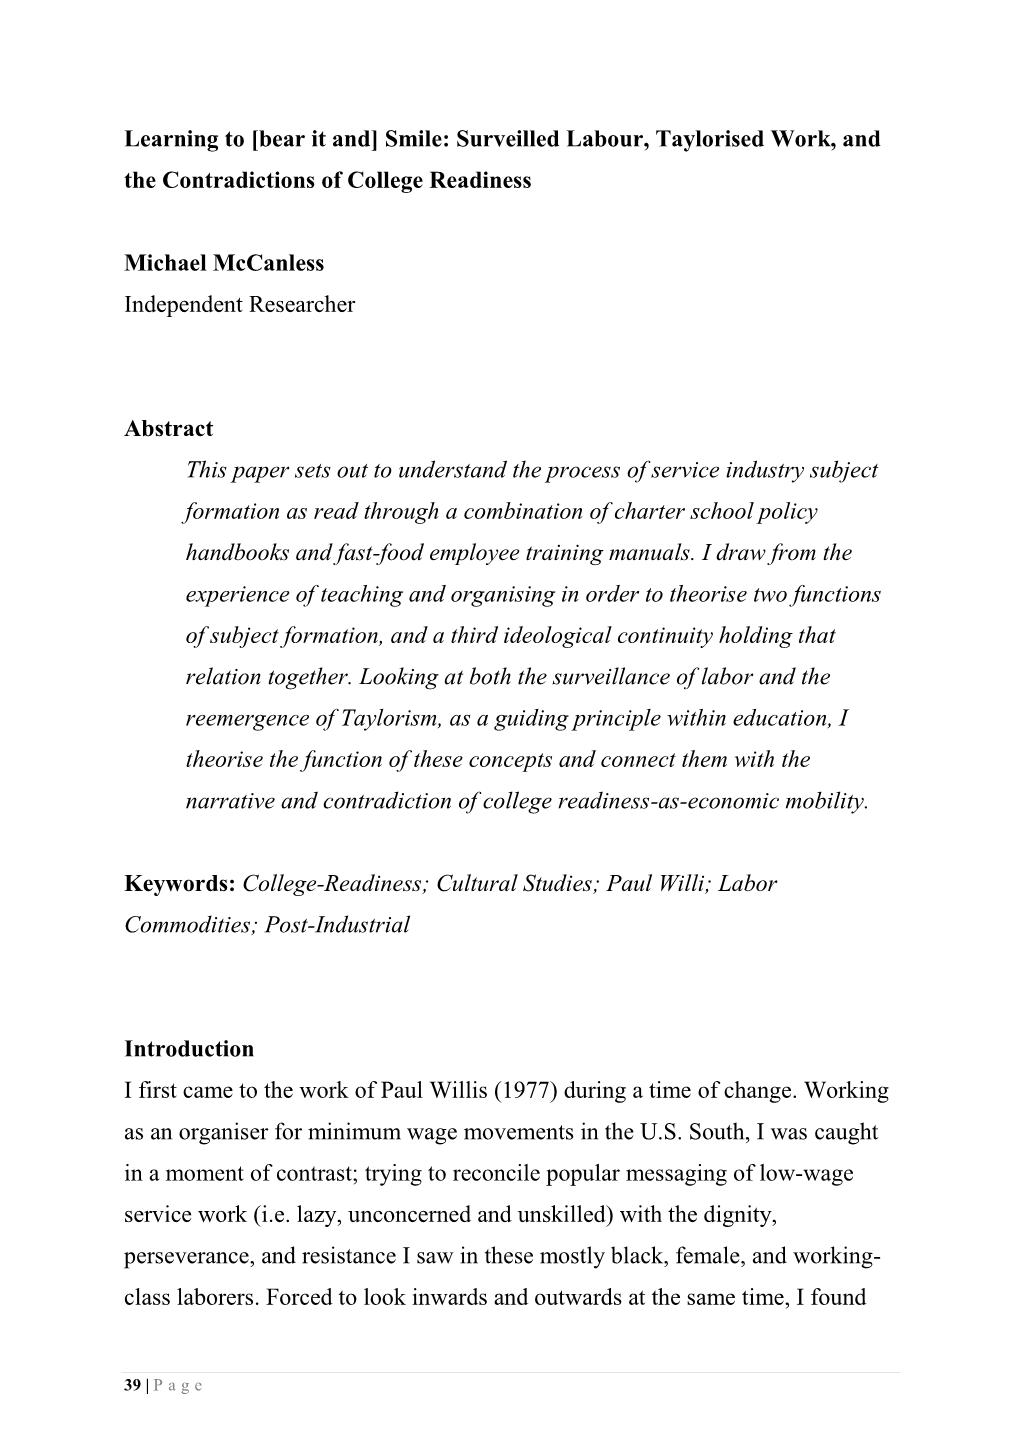 Learning to [Bear It And] Smile: Surveilled Labour, Taylorised Work, and the Contradictions of College Readiness Michael Mccanle